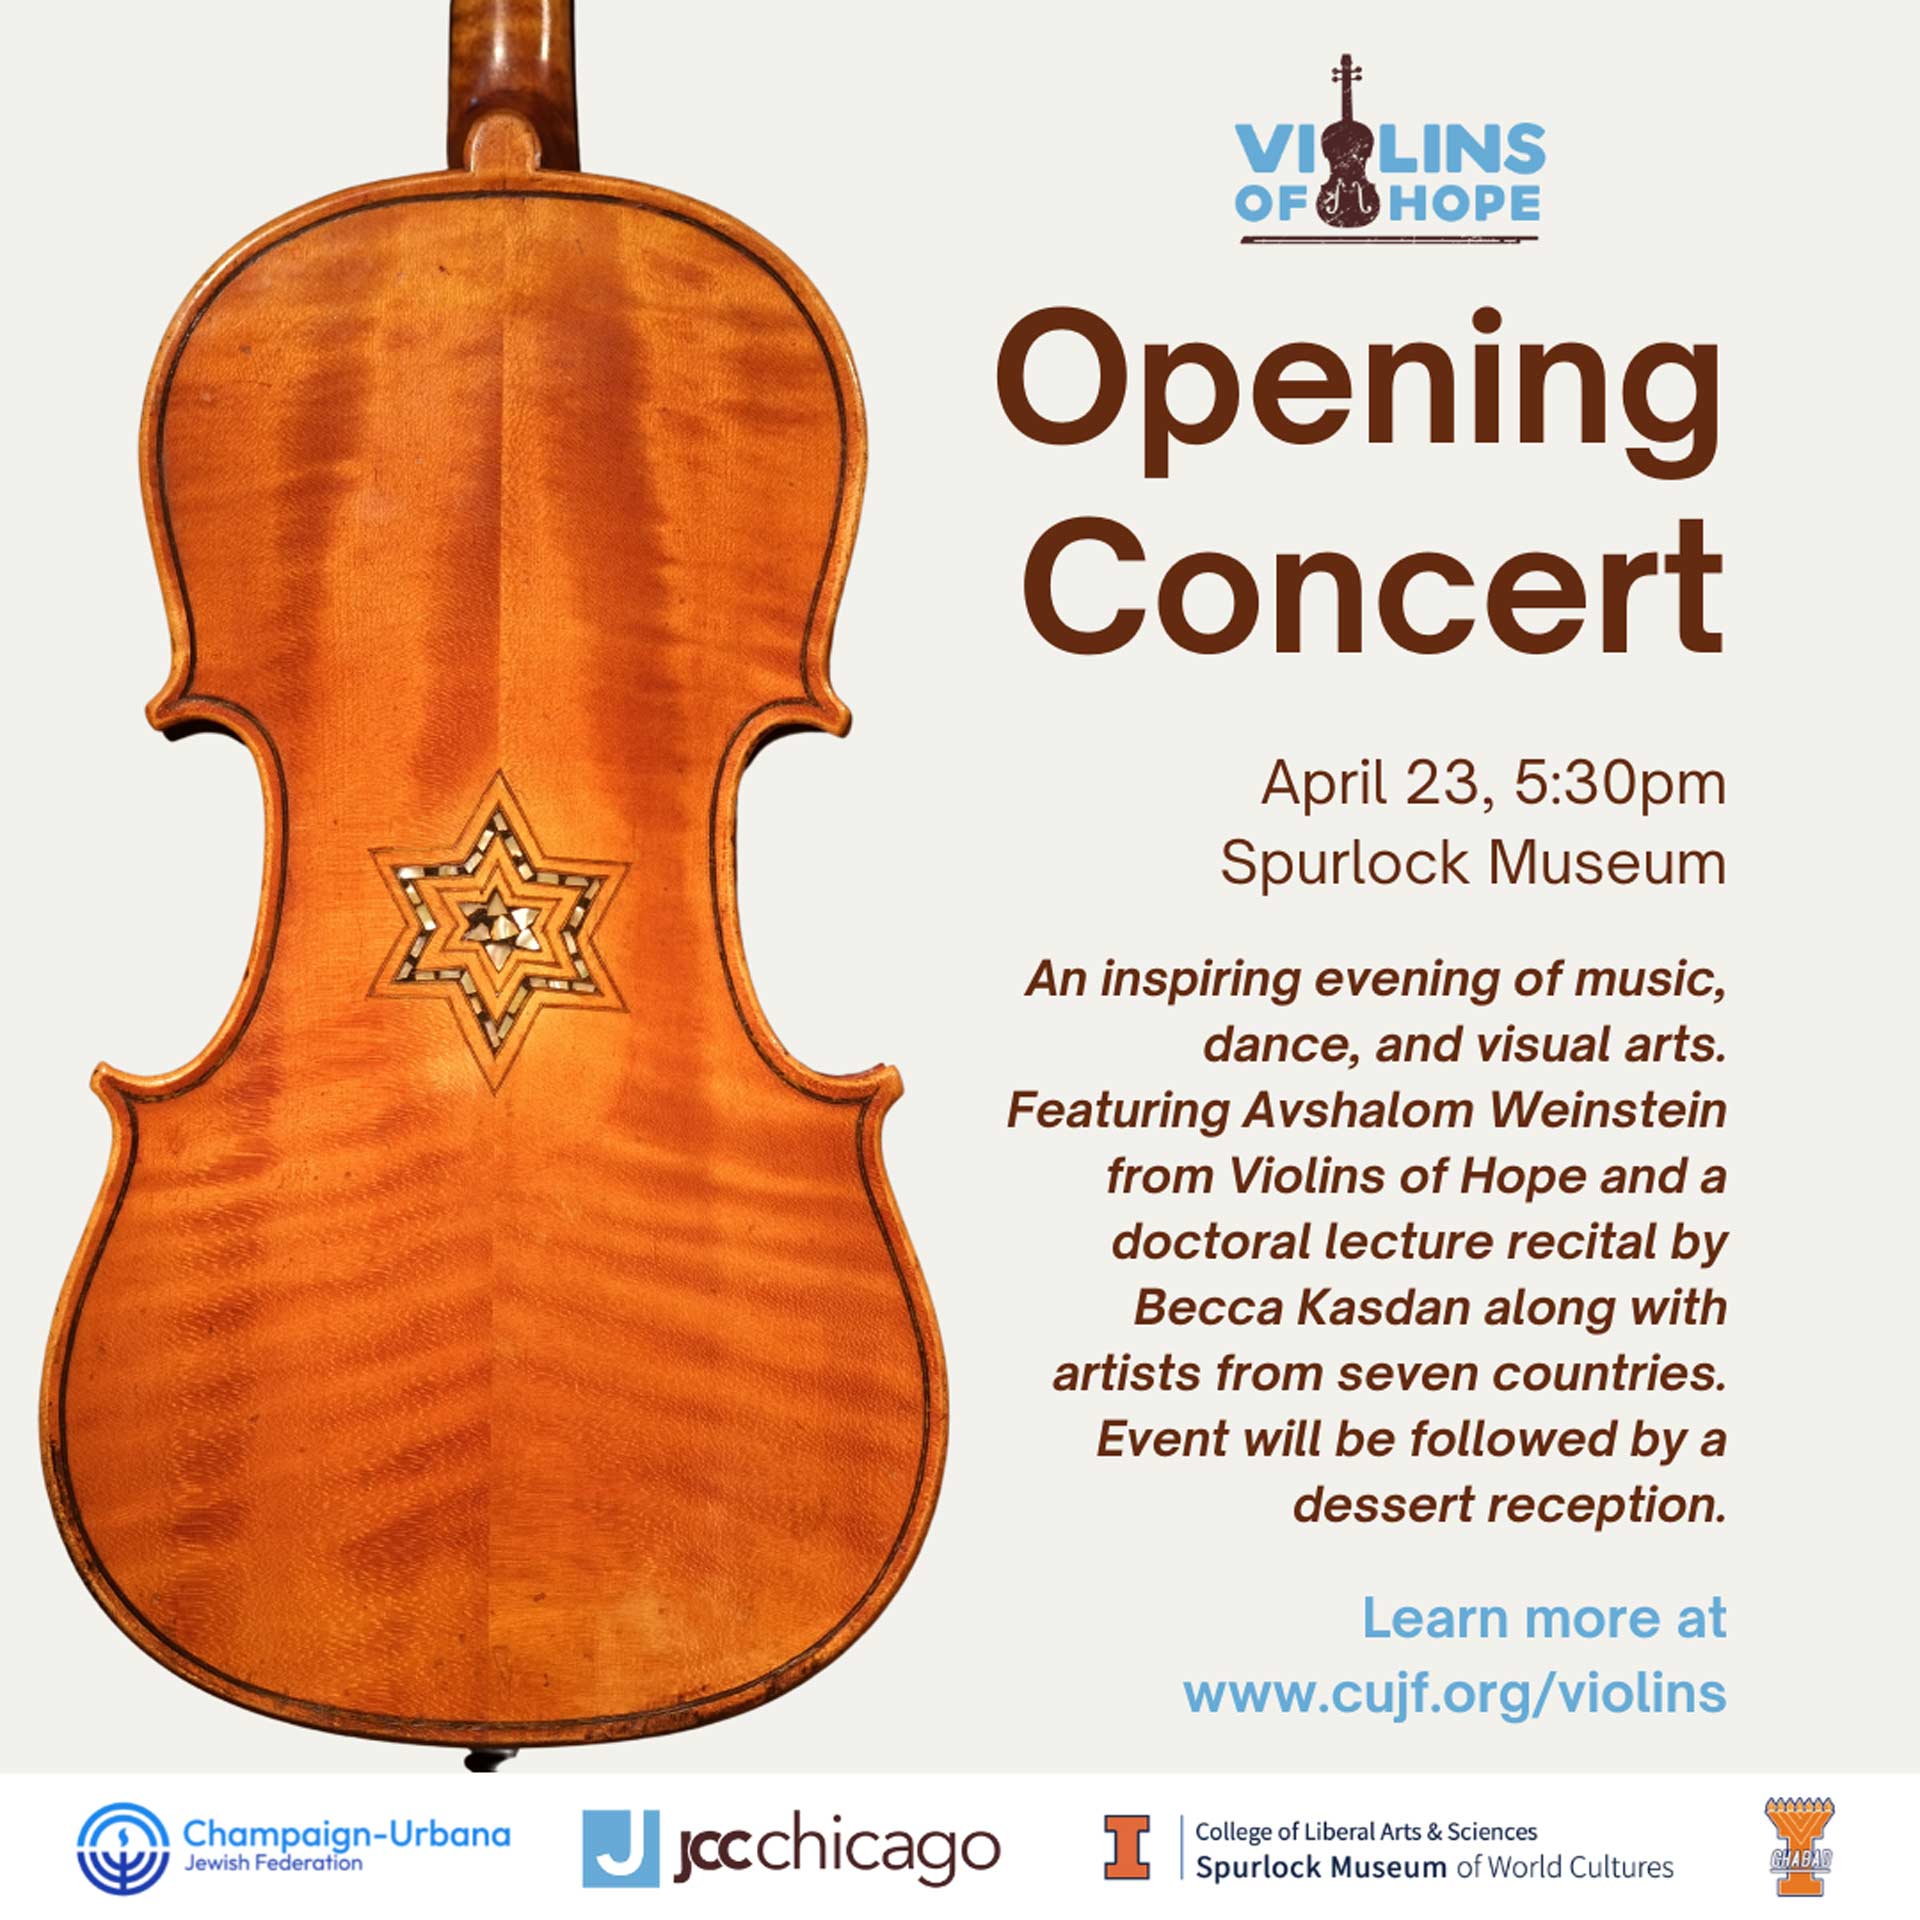 flyer with an image of a violin with the Star of David on it relaying information in event post